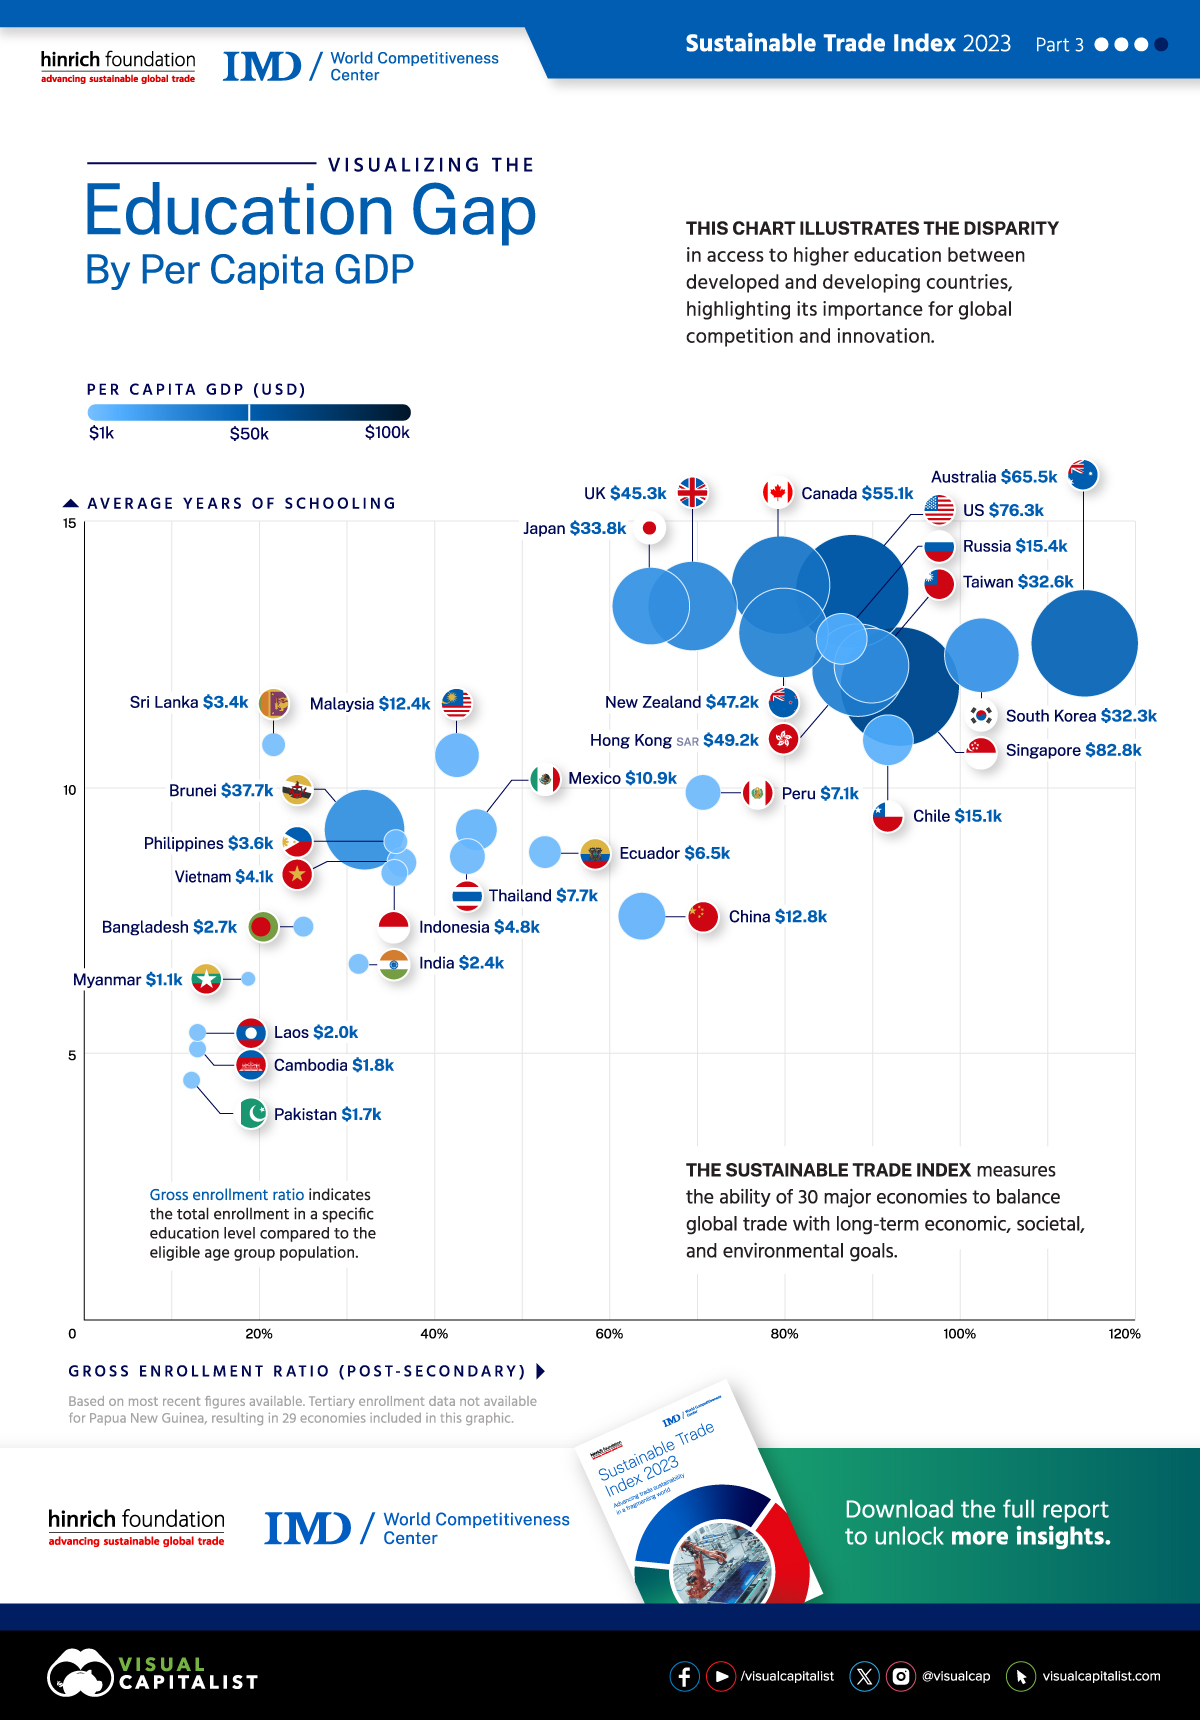 A chart showing the global education gap